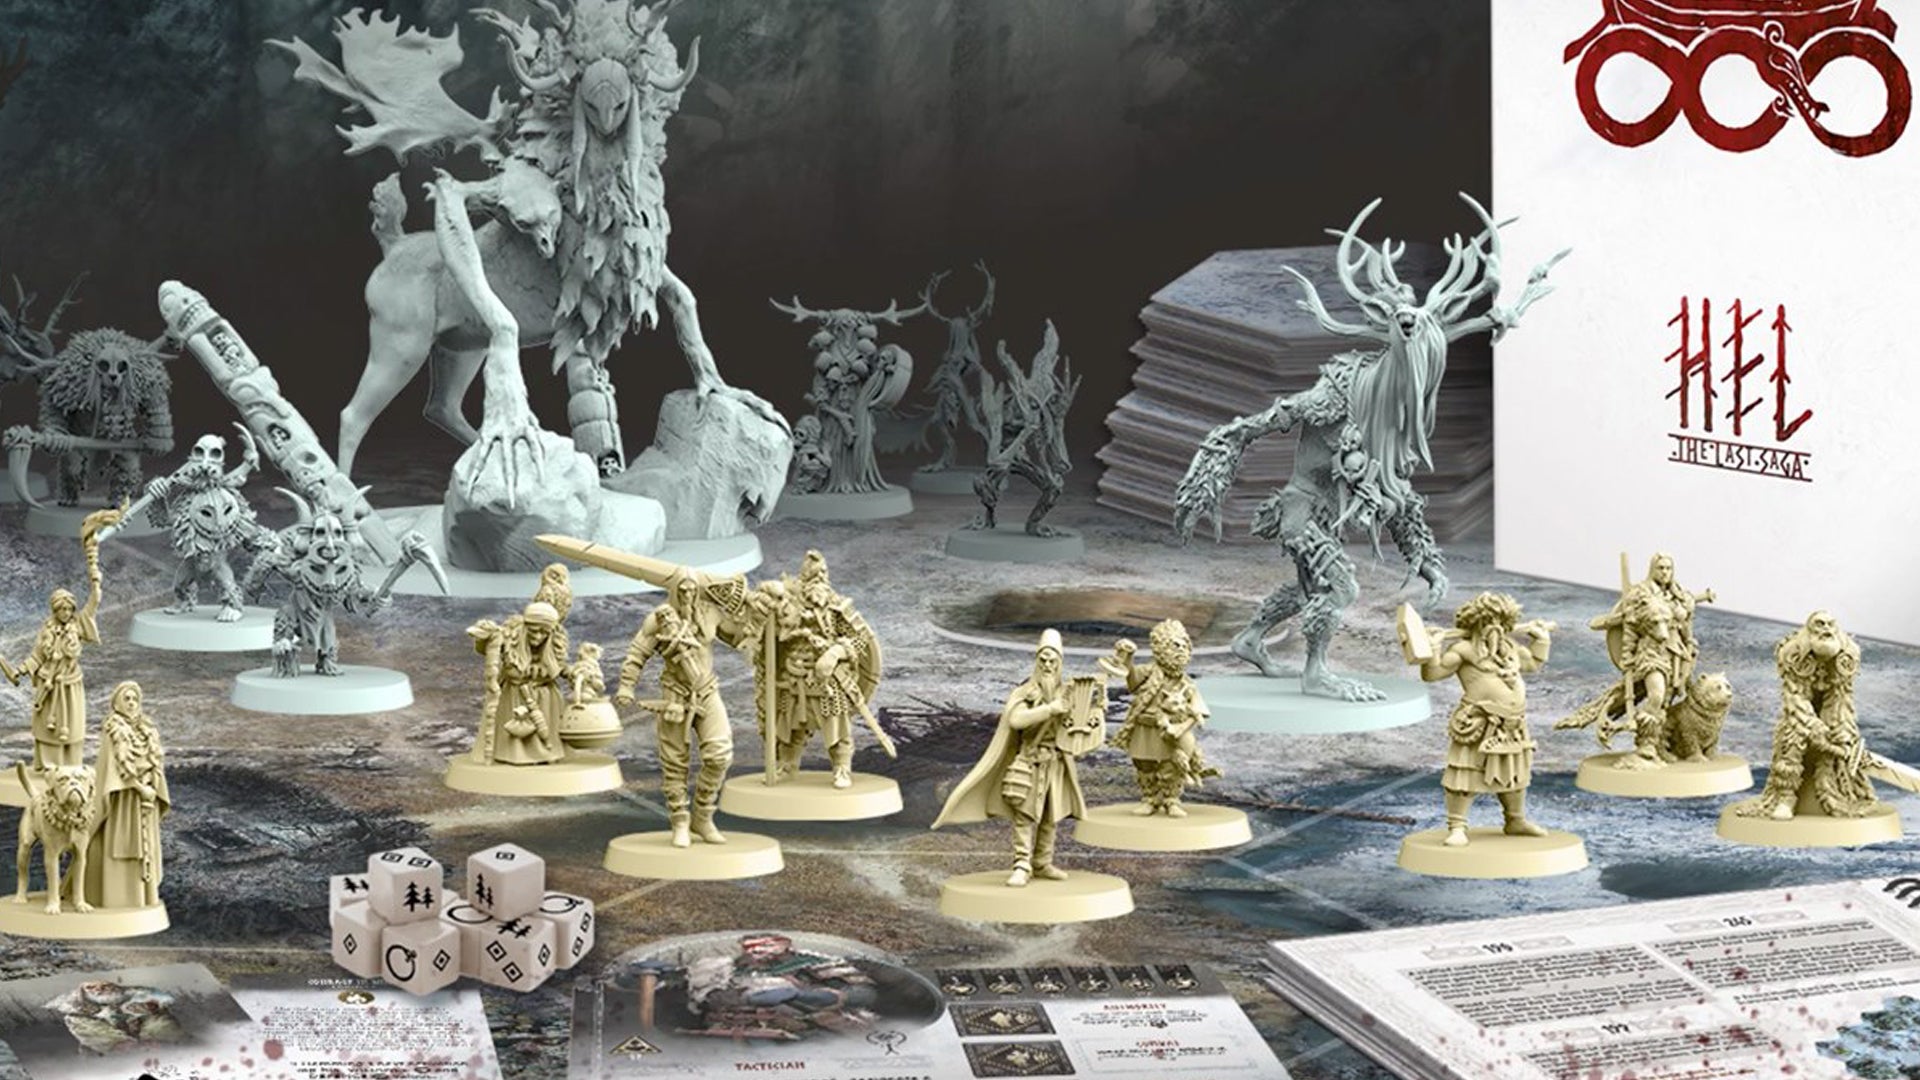 Image for HEL: The Last Saga is a Viking survival-horror board game from Time of Legends: Joan of Arc studio